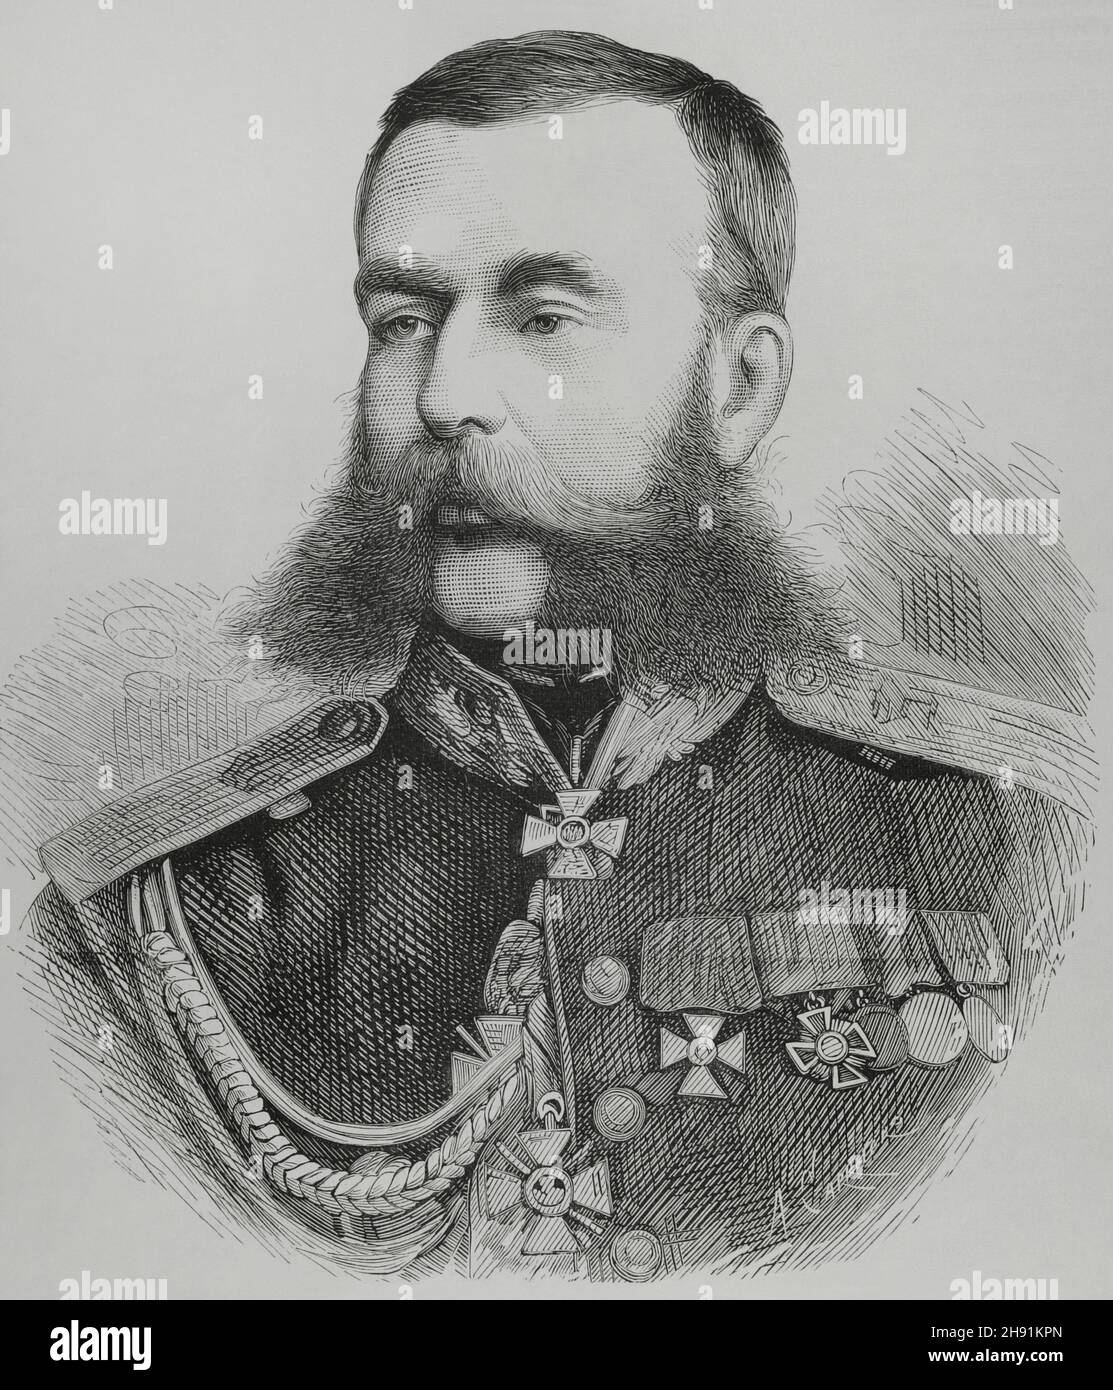 Mikhail Skobelev (1843-1882). Russian general famous for his conquest of Central Asia and heroism during the Russo-Turkish War of 1877-1878. Portrait. Engraving by Arturo Carretero. La Ilustración Española y Americana, 1882. Stock Photo